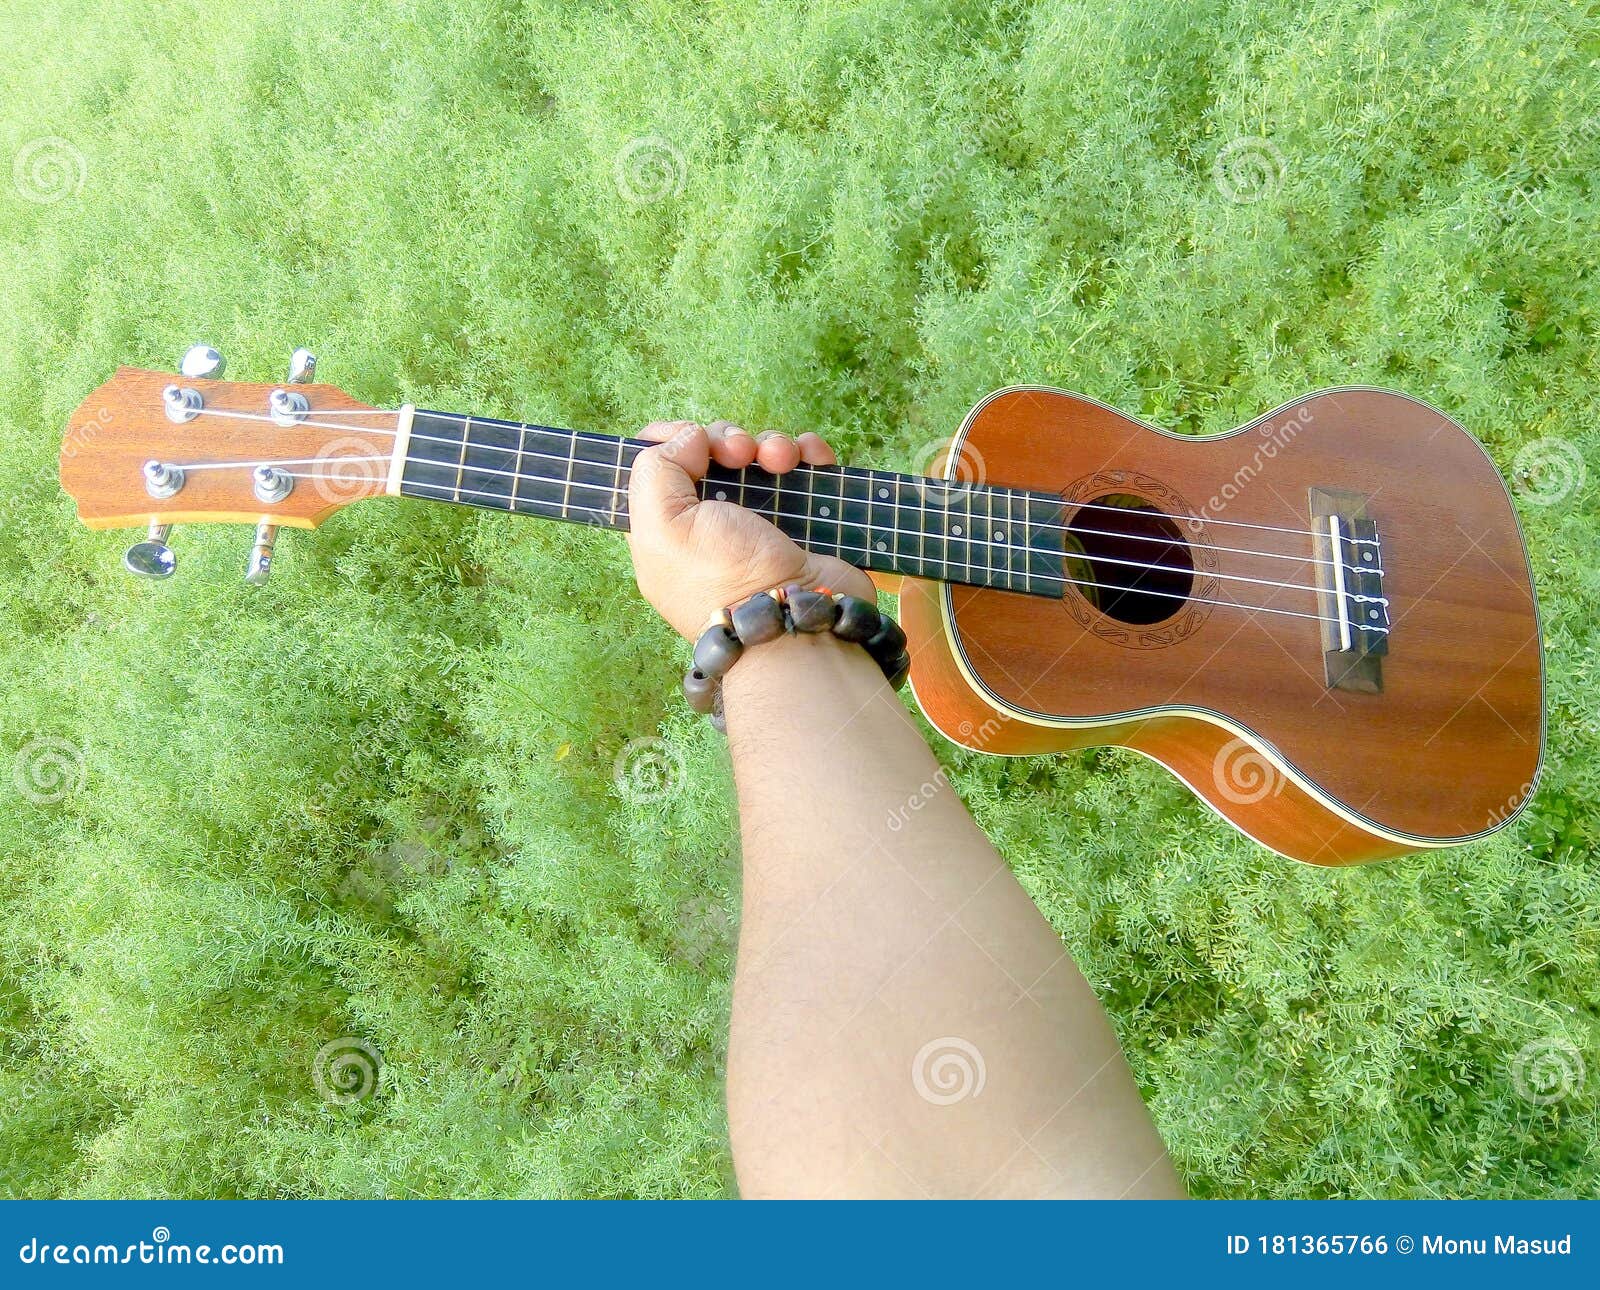 The Best Image of Ukulele Instrument with Natural Environment, a Hand of Music. Nature Sounds-Nature Music - Nature Lovers Stock Photo Image of background, light: 181365766